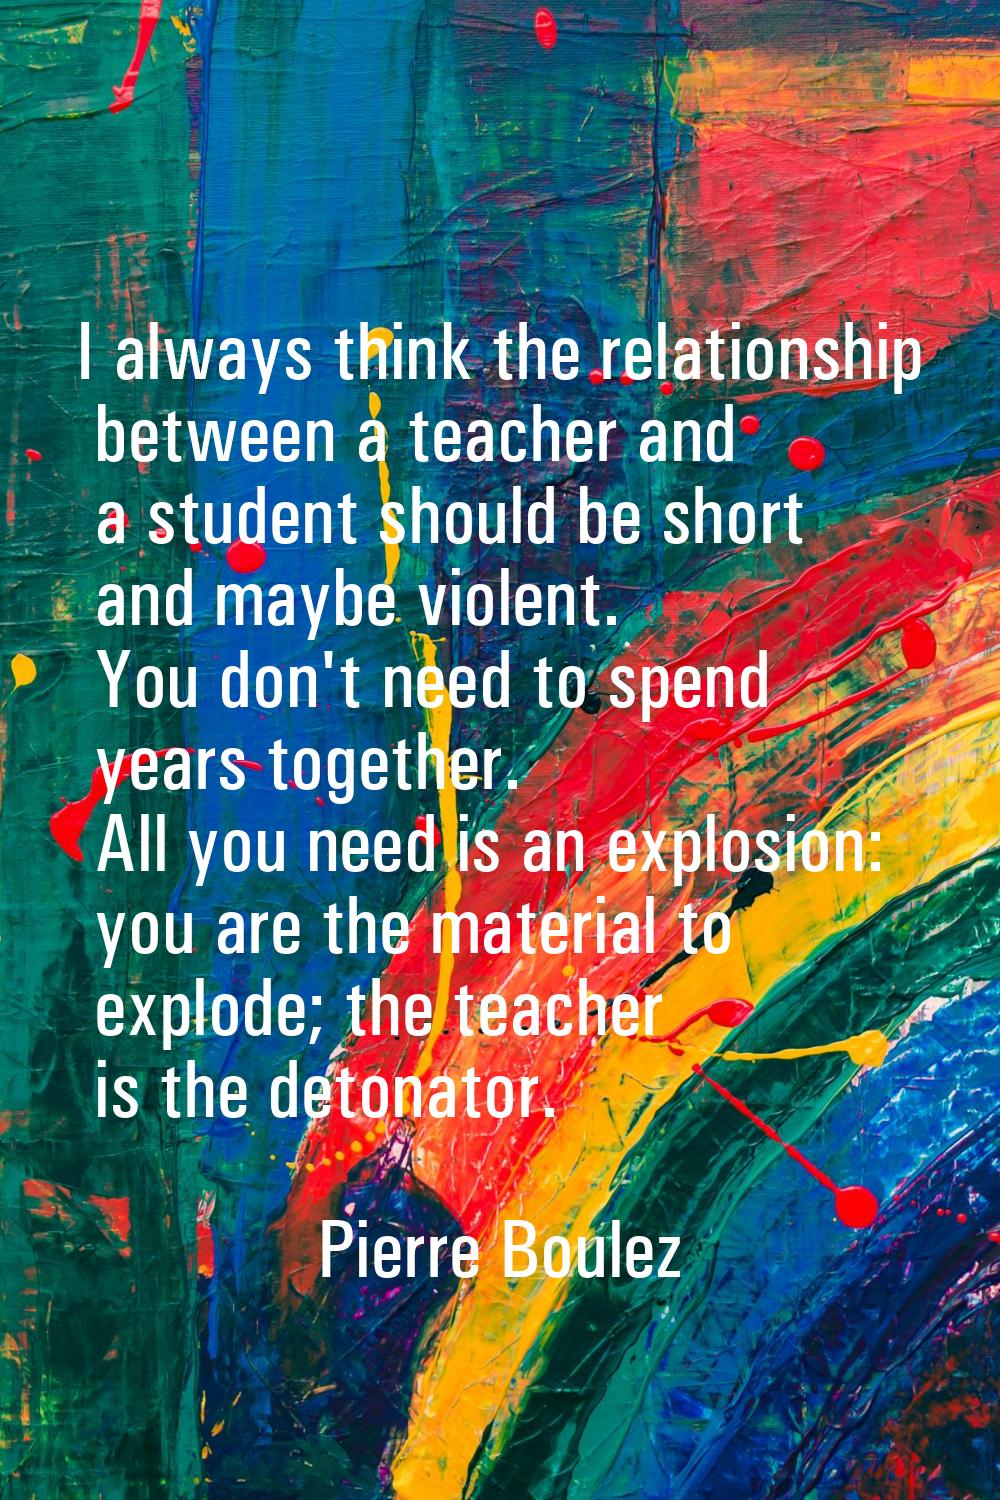 I always think the relationship between a teacher and a student should be short and maybe violent. 